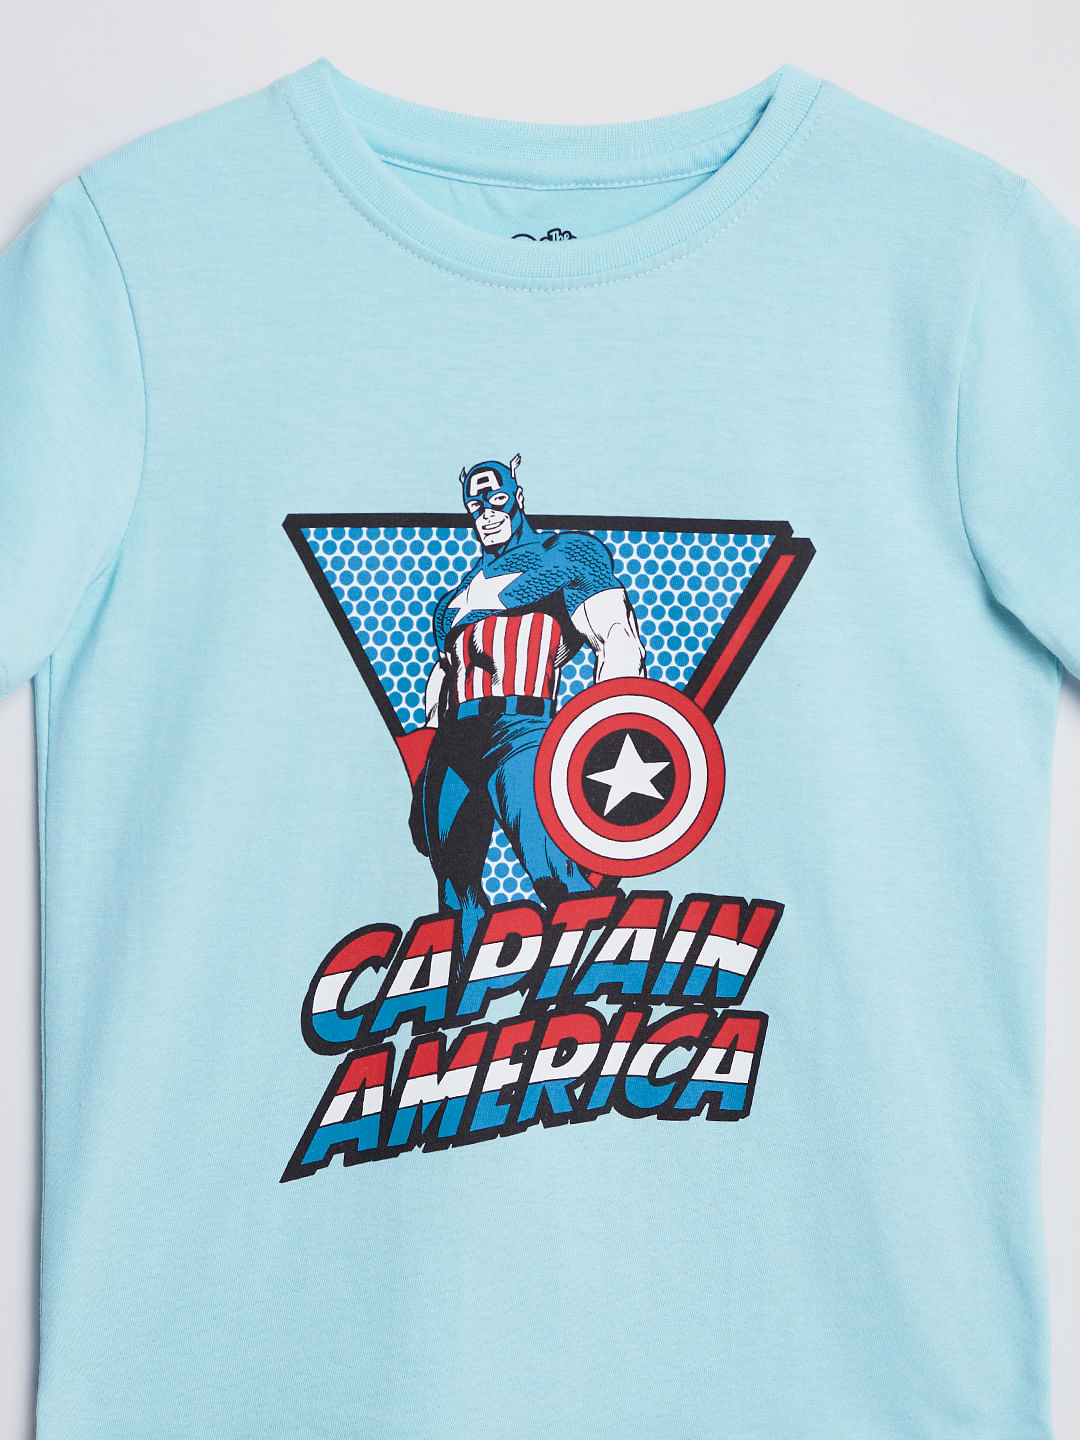 Buy Official Captain Marvel Merchandise online exclusively at The ...